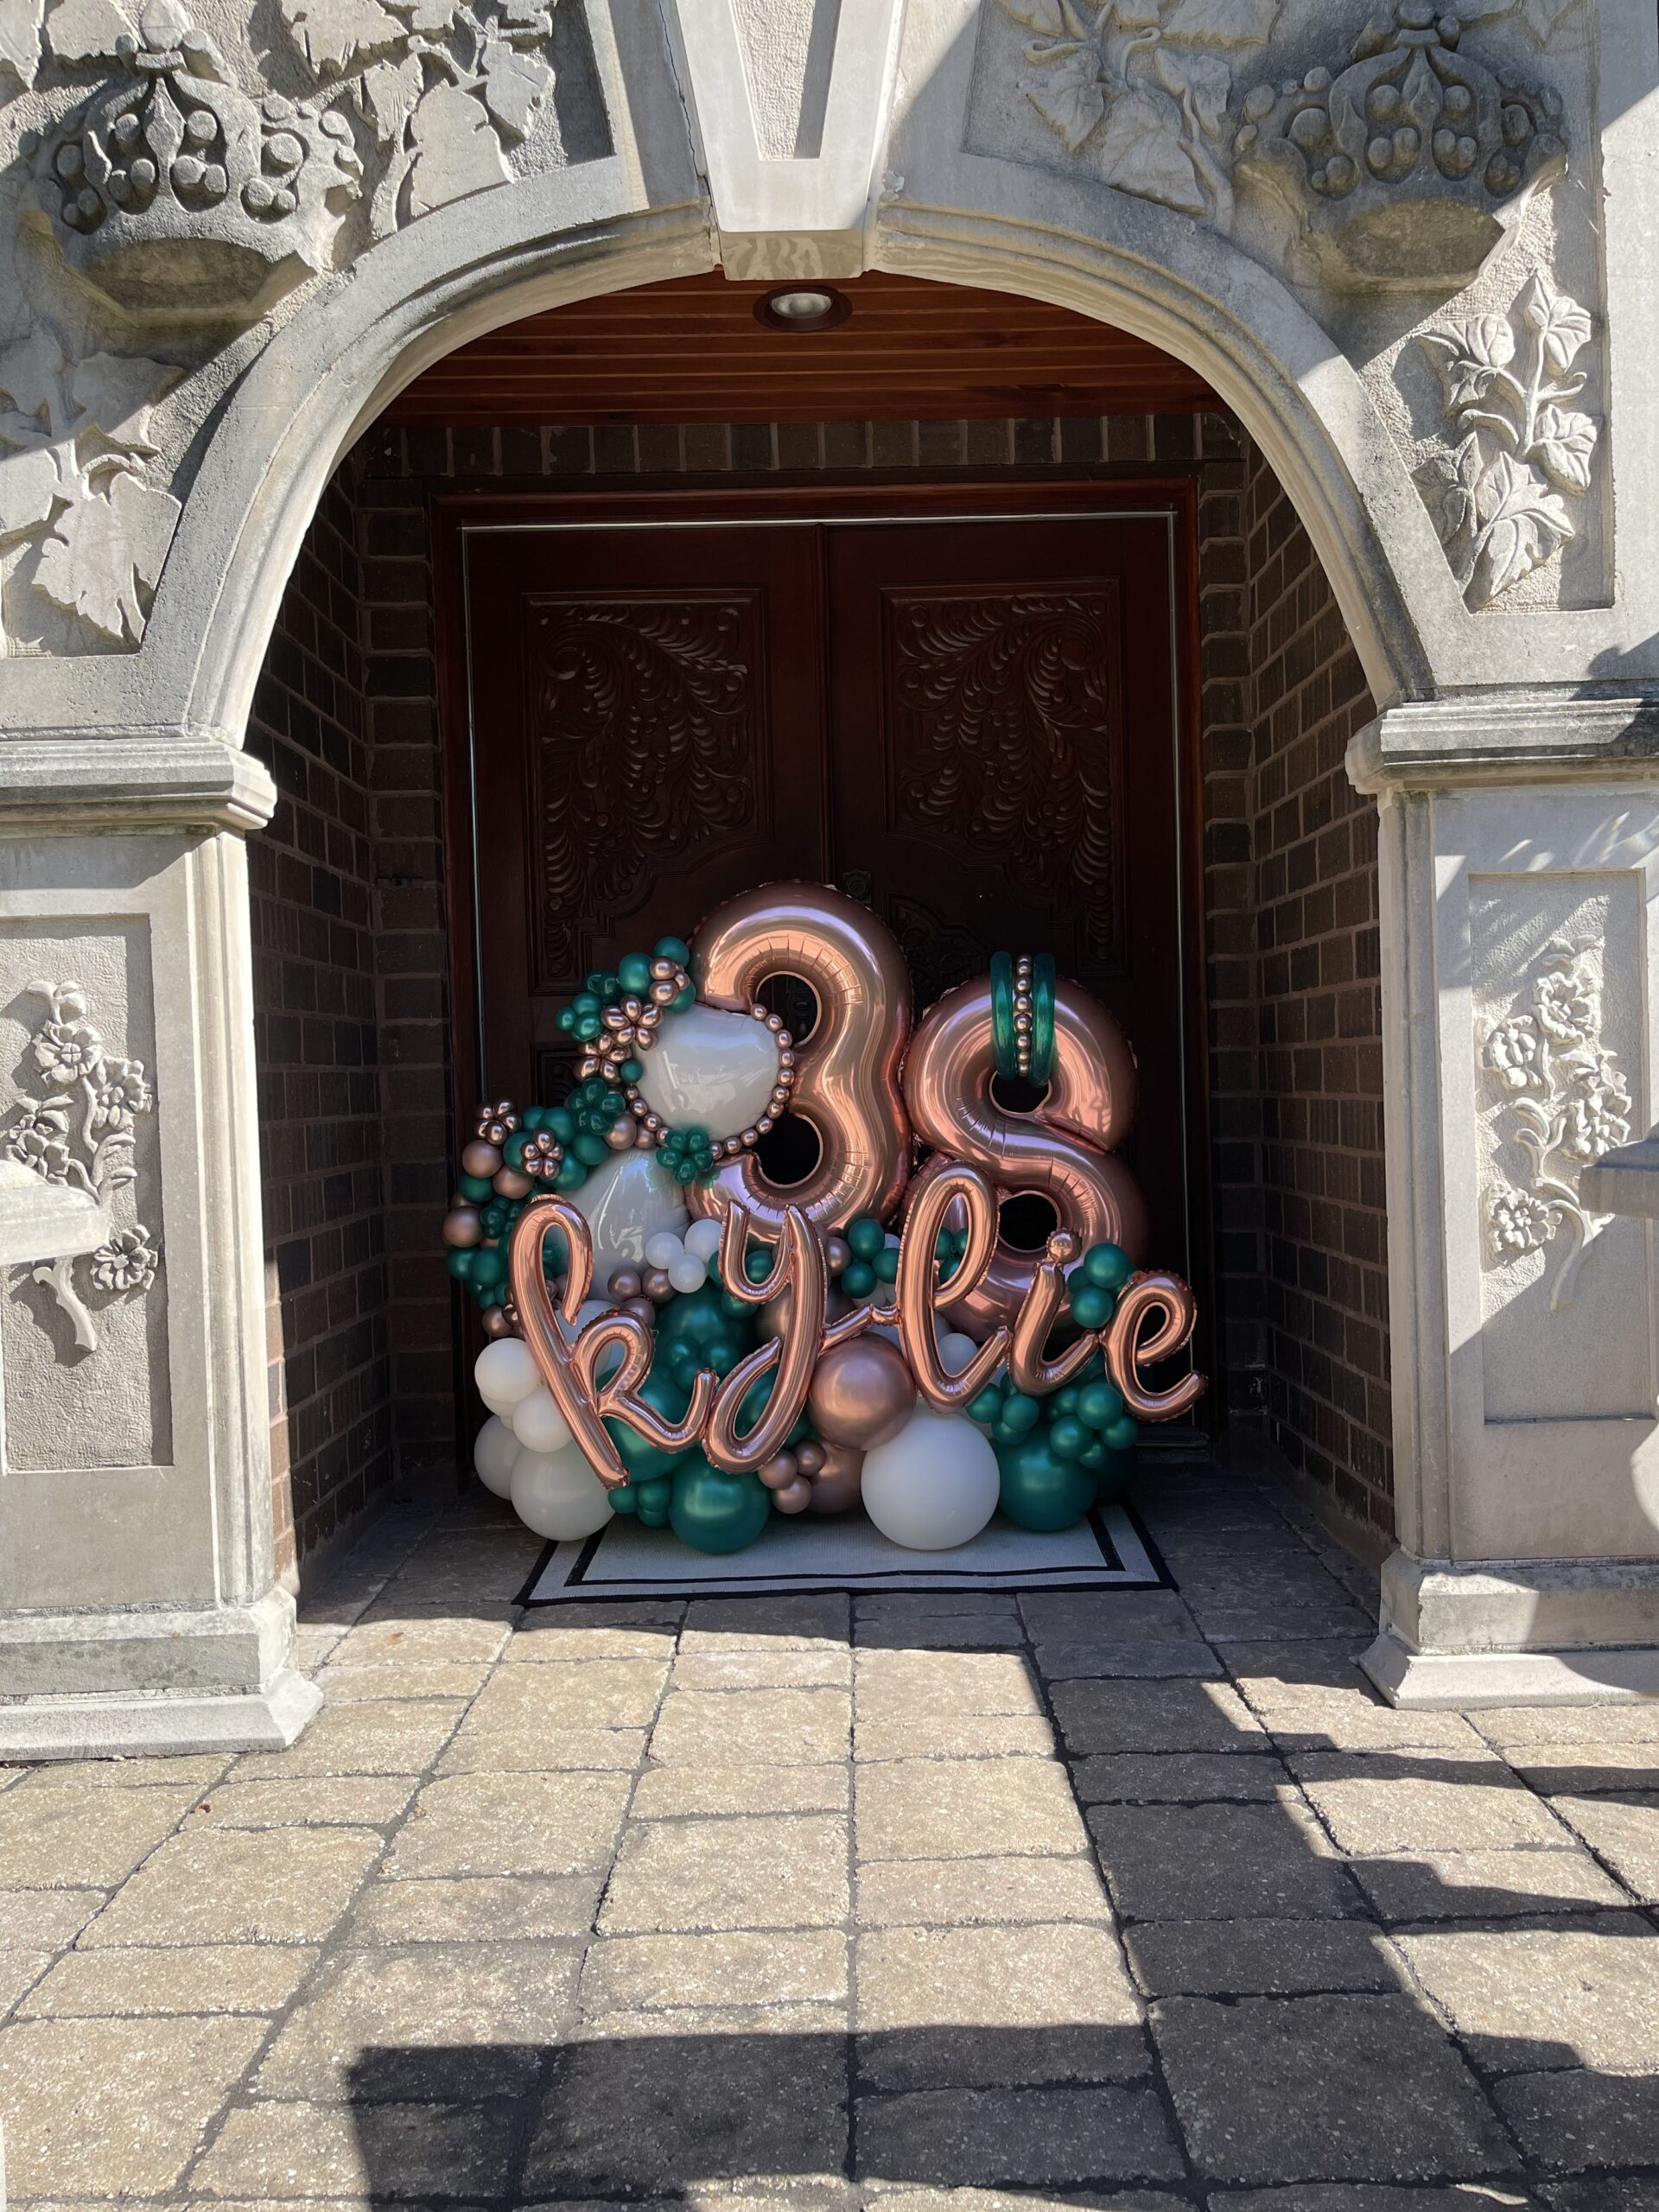 A birthday balloon display in someone's doorway.